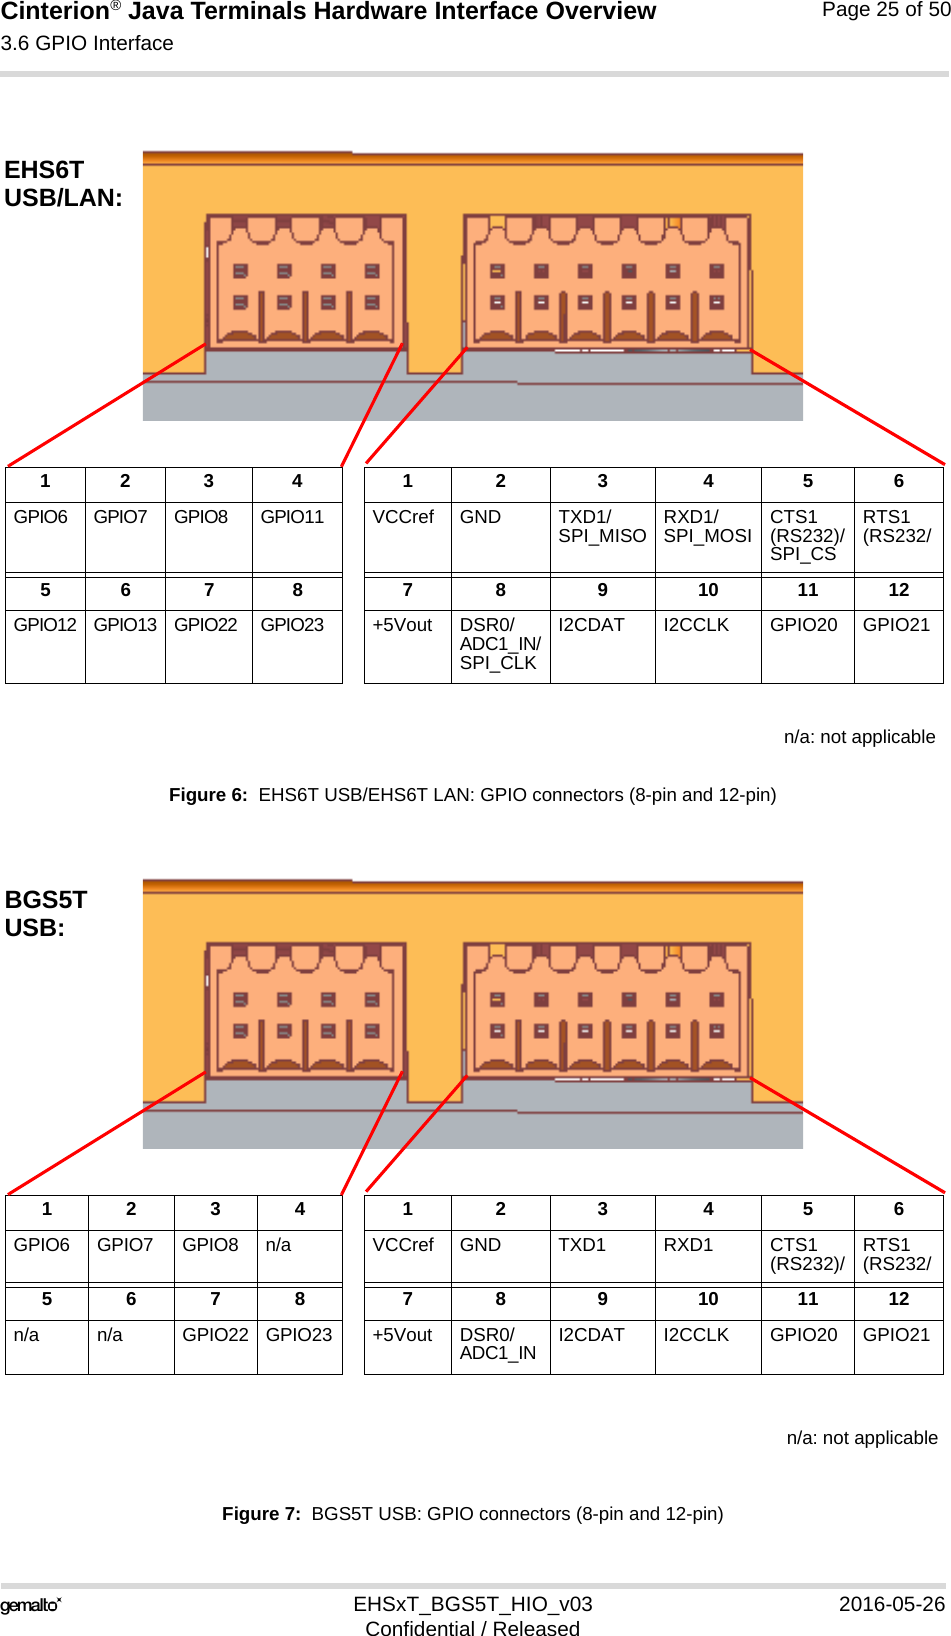 Cinterion® Java Terminals Hardware Interface Overview3.6 GPIO Interface39EHSxT_BGS5T_HIO_v03 2016-05-26Confidential / ReleasedPage 25 of 50Figure 6:  EHS6T USB/EHS6T LAN: GPIO connectors (8-pin and 12-pin)Figure 7:  BGS5T USB: GPIO connectors (8-pin and 12-pin)12 3 4 1 2 3 4 5 6GPIO6 GPIO7 GPIO8 GPIO11 VCCref GND TXD1/SPI_MISO RXD1/SPI_MOSI CTS1(RS232)/SPI_CSRTS1(RS232/56 7 8 7 8 9 10 1112GPIO12 GPIO13 GPIO22 GPIO23 +5Vout DSR0/ADC1_IN/SPI_CLKI2CDAT I2CCLK GPIO20 GPIO21EHS6TUSB/LAN:n/a: not applicable1234 1 2 3 4 5 6GPIO6 GPIO7 GPIO8 n/a VCCref GND TXD1 RXD1 CTS1(RS232)/ RTS1(RS232/5678 7 8 9 10 1112n/a n/a GPIO22 GPIO23 +5Vout DSR0/ADC1_IN I2CDAT I2CCLK GPIO20 GPIO21BGS5T n/a: not applicableUSB: